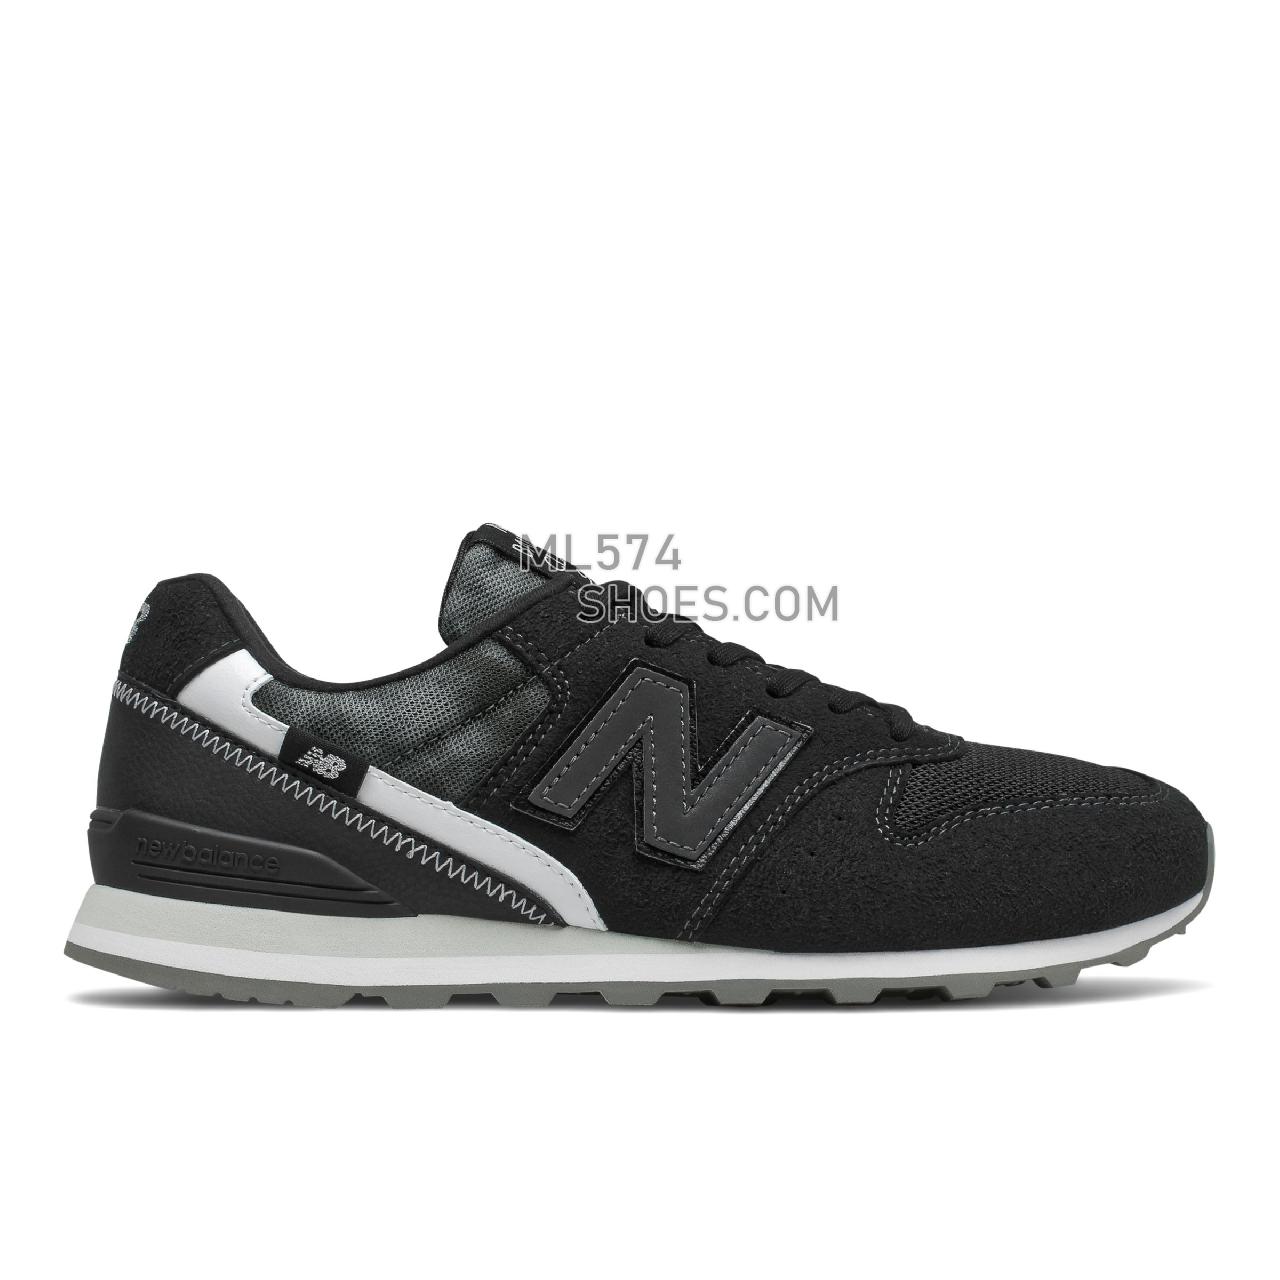 New Balance WL996v2 - Women's Classic Sneakers - Black with White - WL996FPB